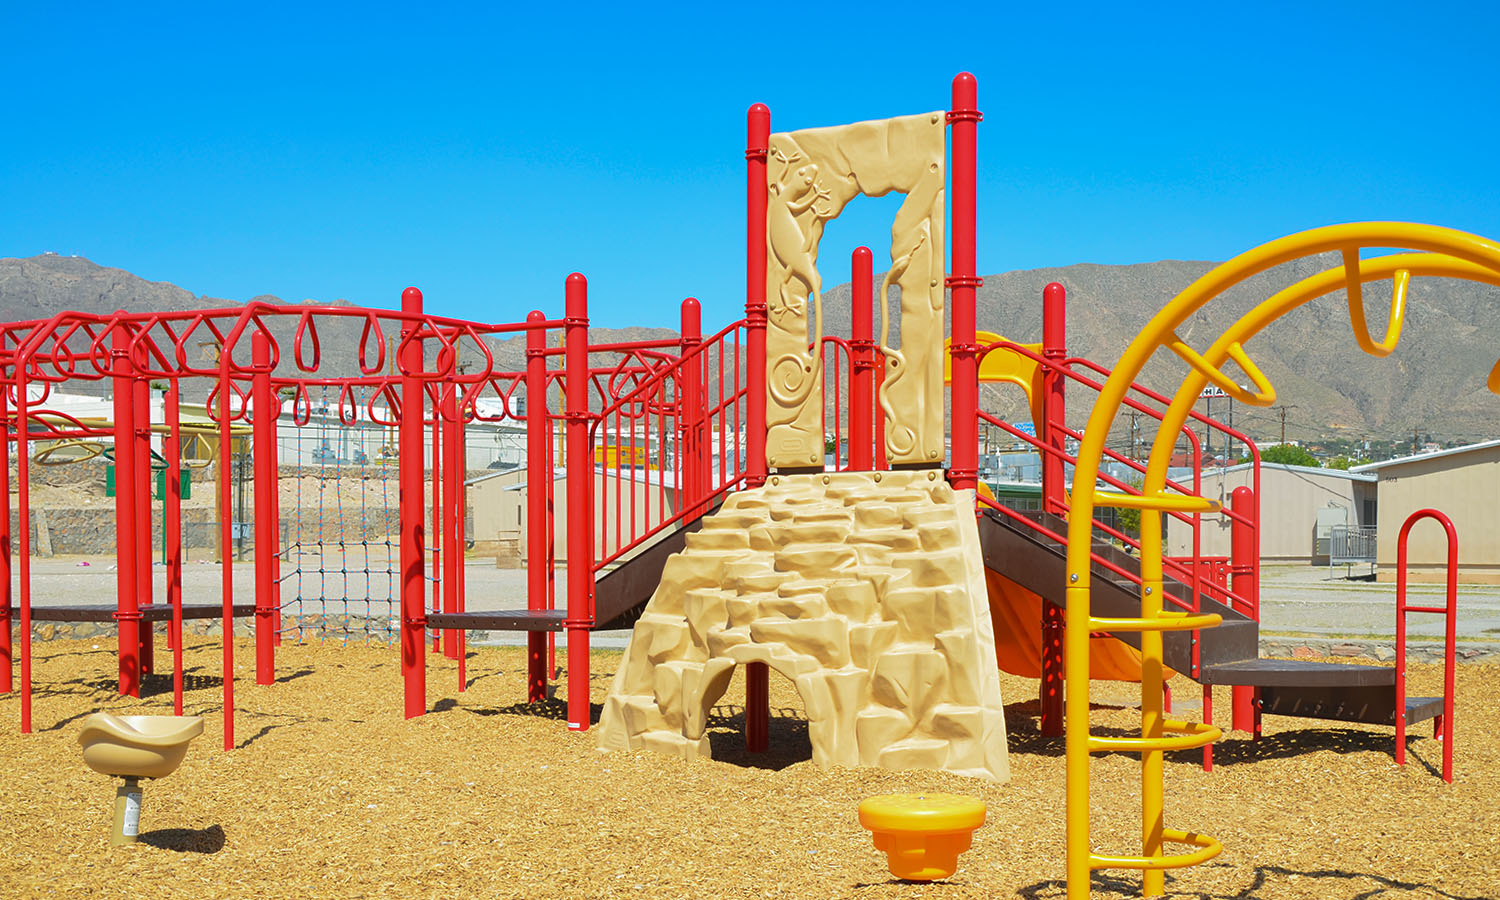 EL PASO ISD DISTRICT WIDE PLAYGROUND STRUCTURE REPLACEMENT, MNK Architects, Architects El Paso Texas, Architects Texas, Architects New Mexico, Architect, Architects, Architect El Paso Texas, Architect New Mexico, El Paso County